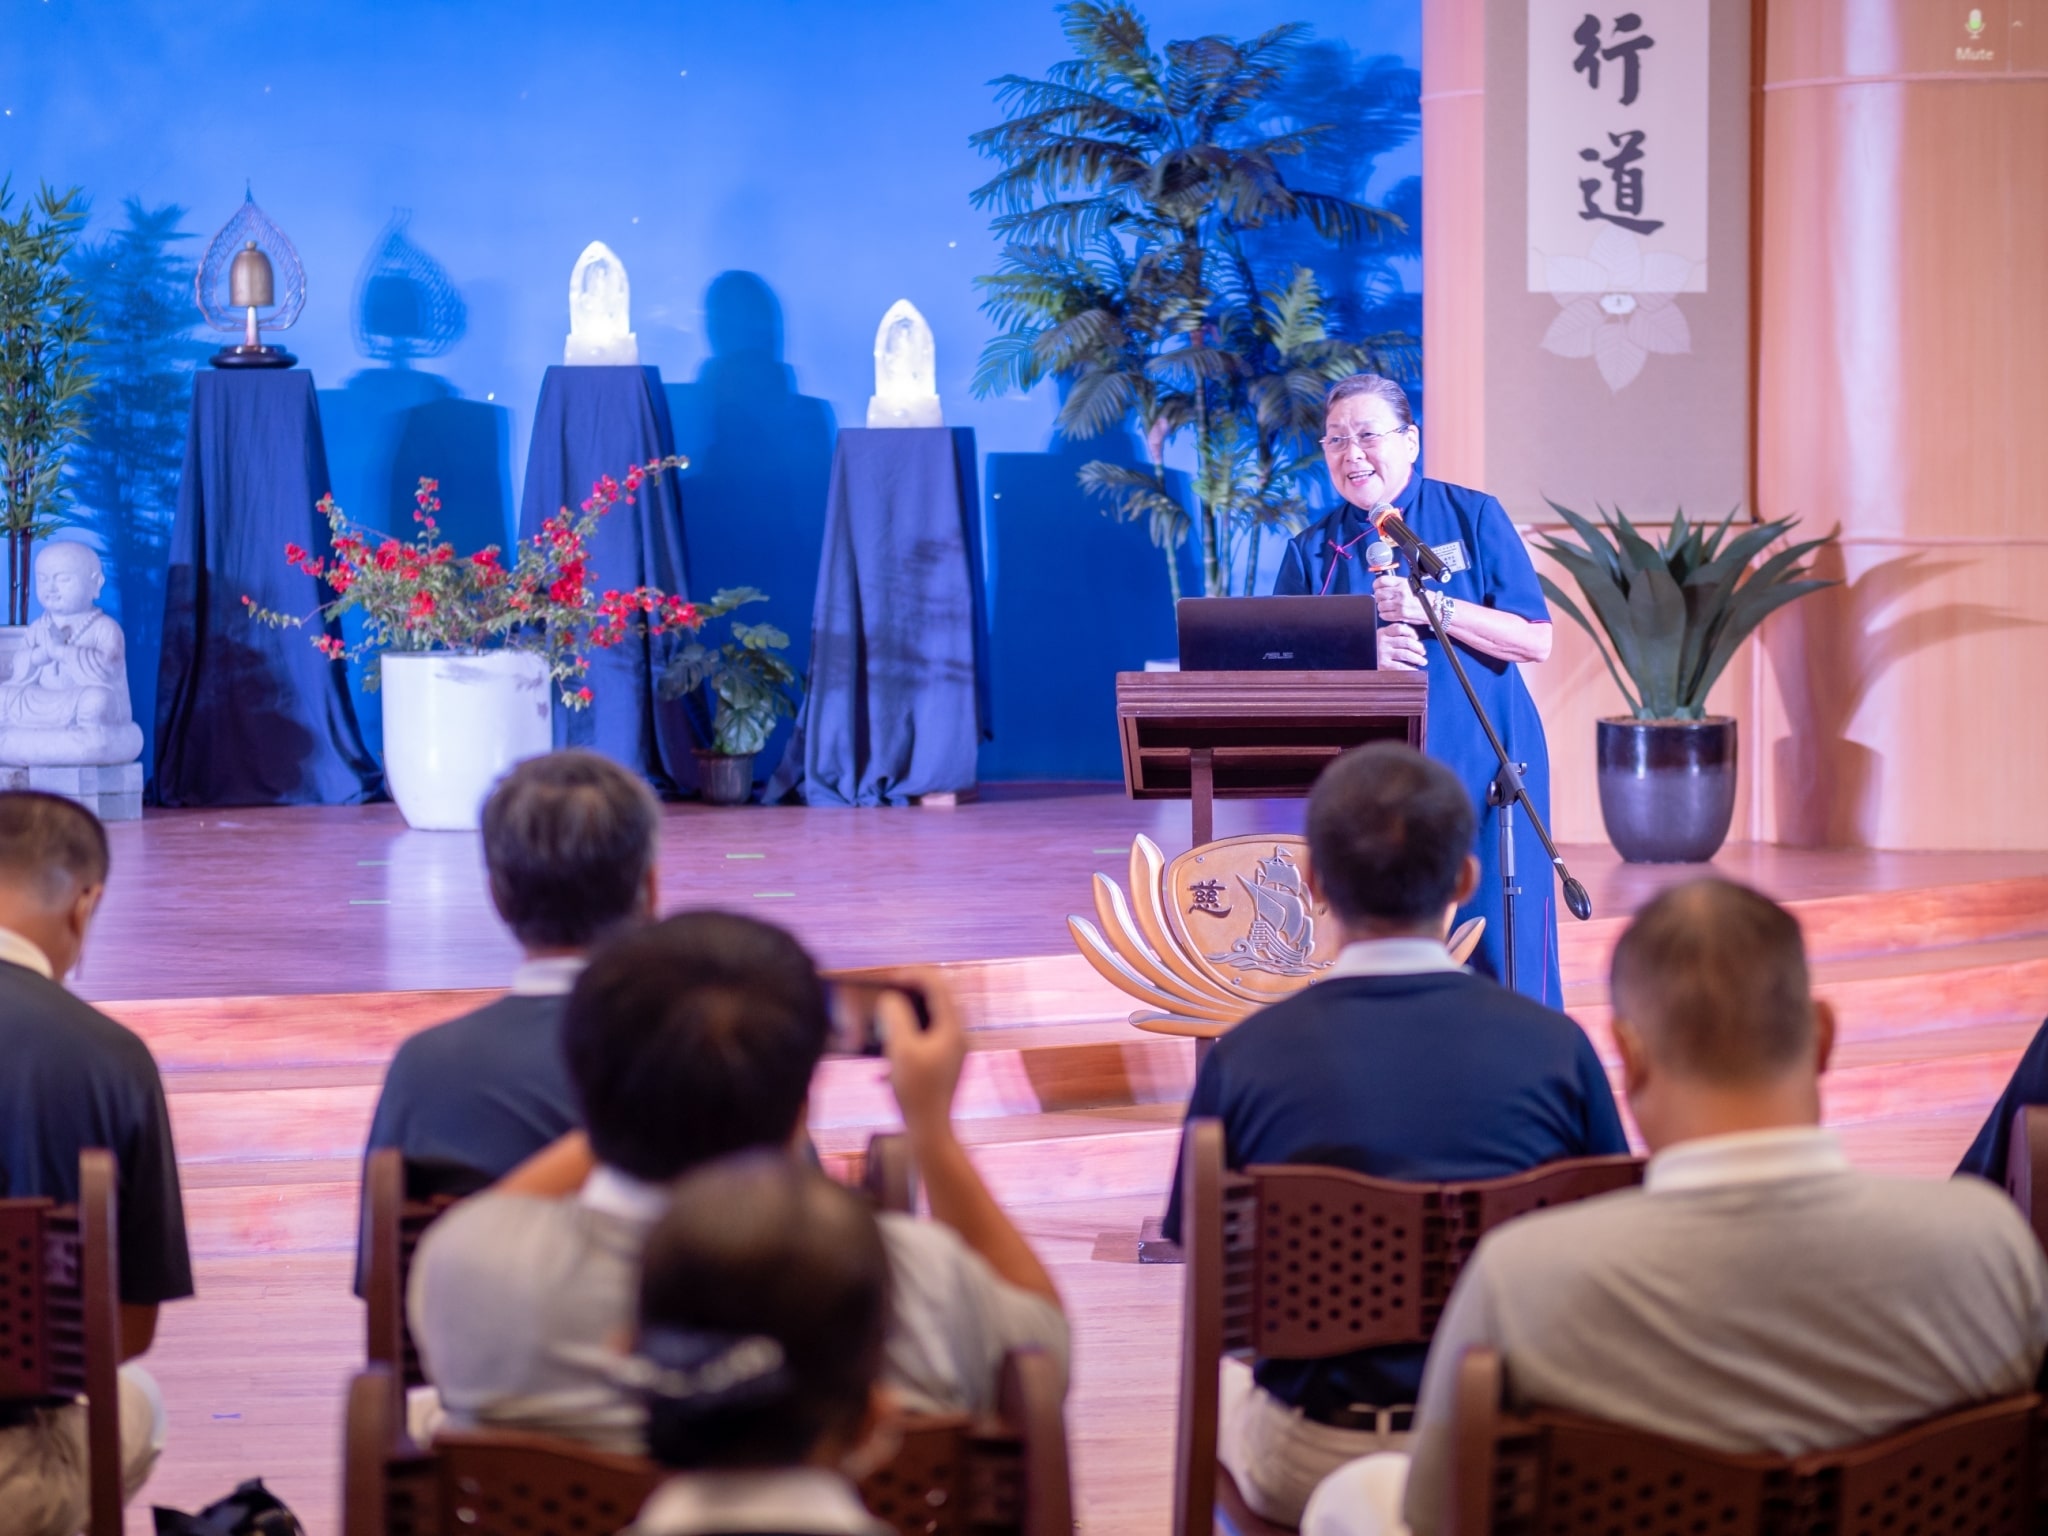 Judy Lao narrates the history of Tzu Chi Philippines, beginning from Master Cheng Yen’s donation of the cash prize she received from The Magsaysay Community Leadership from the Ramon Magsaysay Award Foundation in 1991, which lead to the inauguration of Tzu Chi Philippines on November 8, 1994.【Photo by Daniel Lazar】